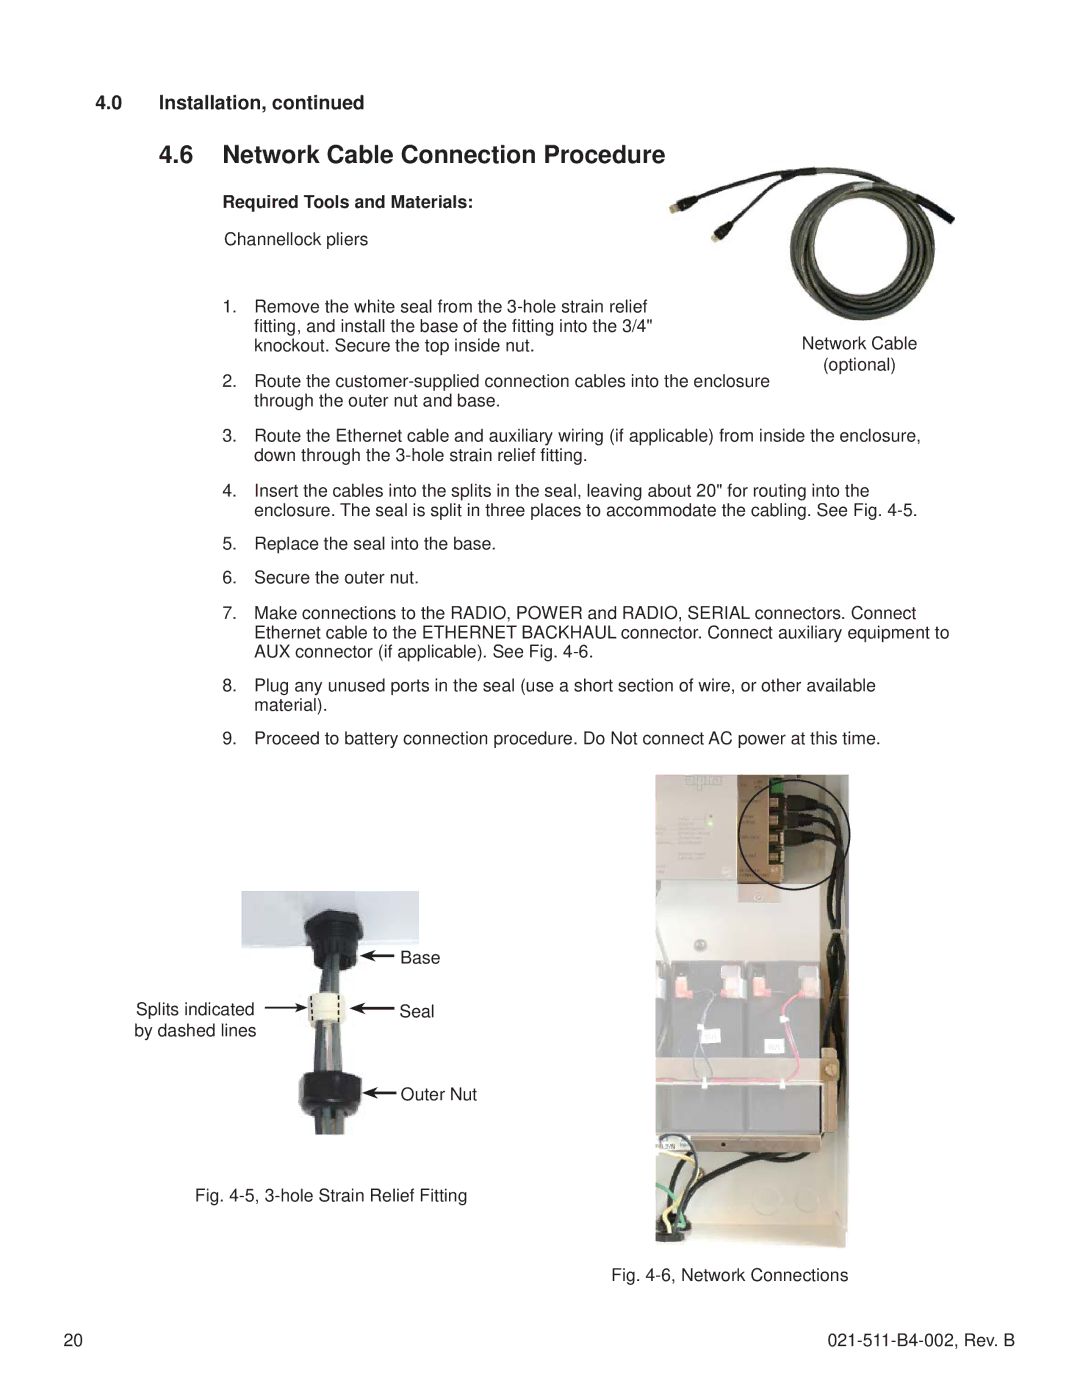 Alpha Vision Tech MPS48-7M technical manual Network Cable Connection Procedure, hole Strain Relief Fitting 